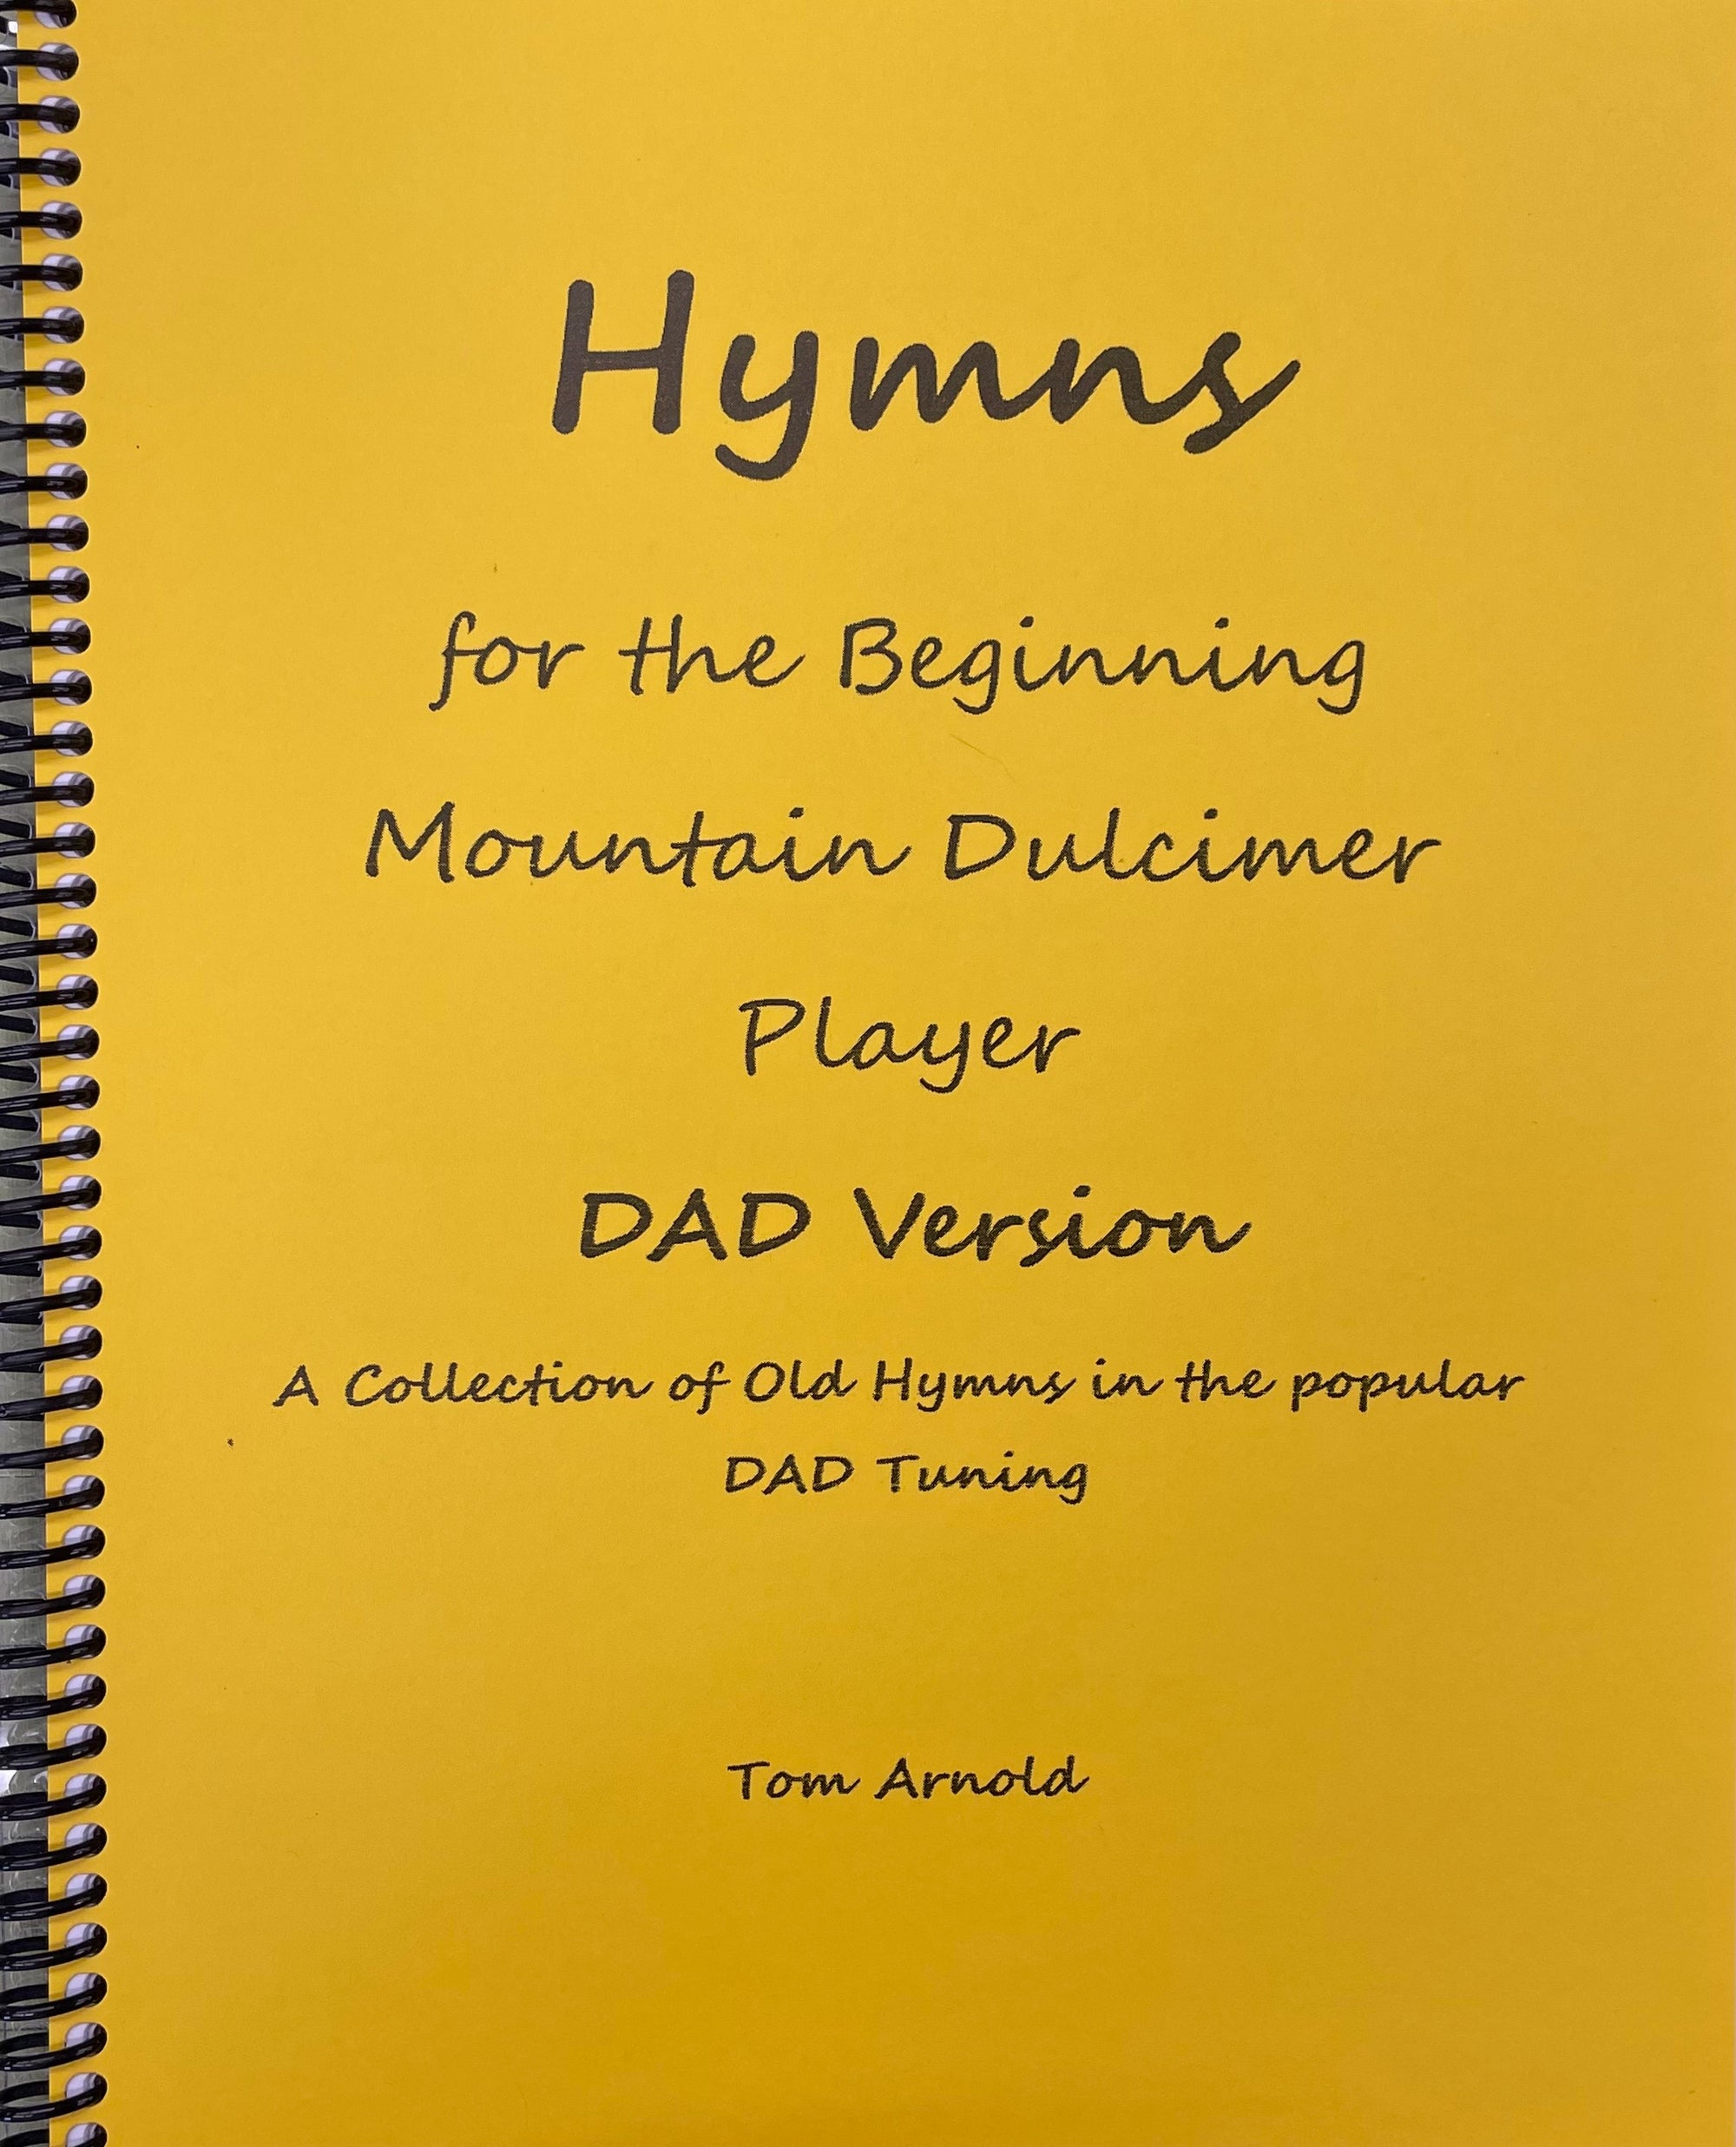 Spiral-bound yellow book cover titled "Hymns for the Beginning Mountain Dulcimer Player (DAD) by Tom Arnold," described as a collection of old hymns in DAD tuning with clear musical notation.